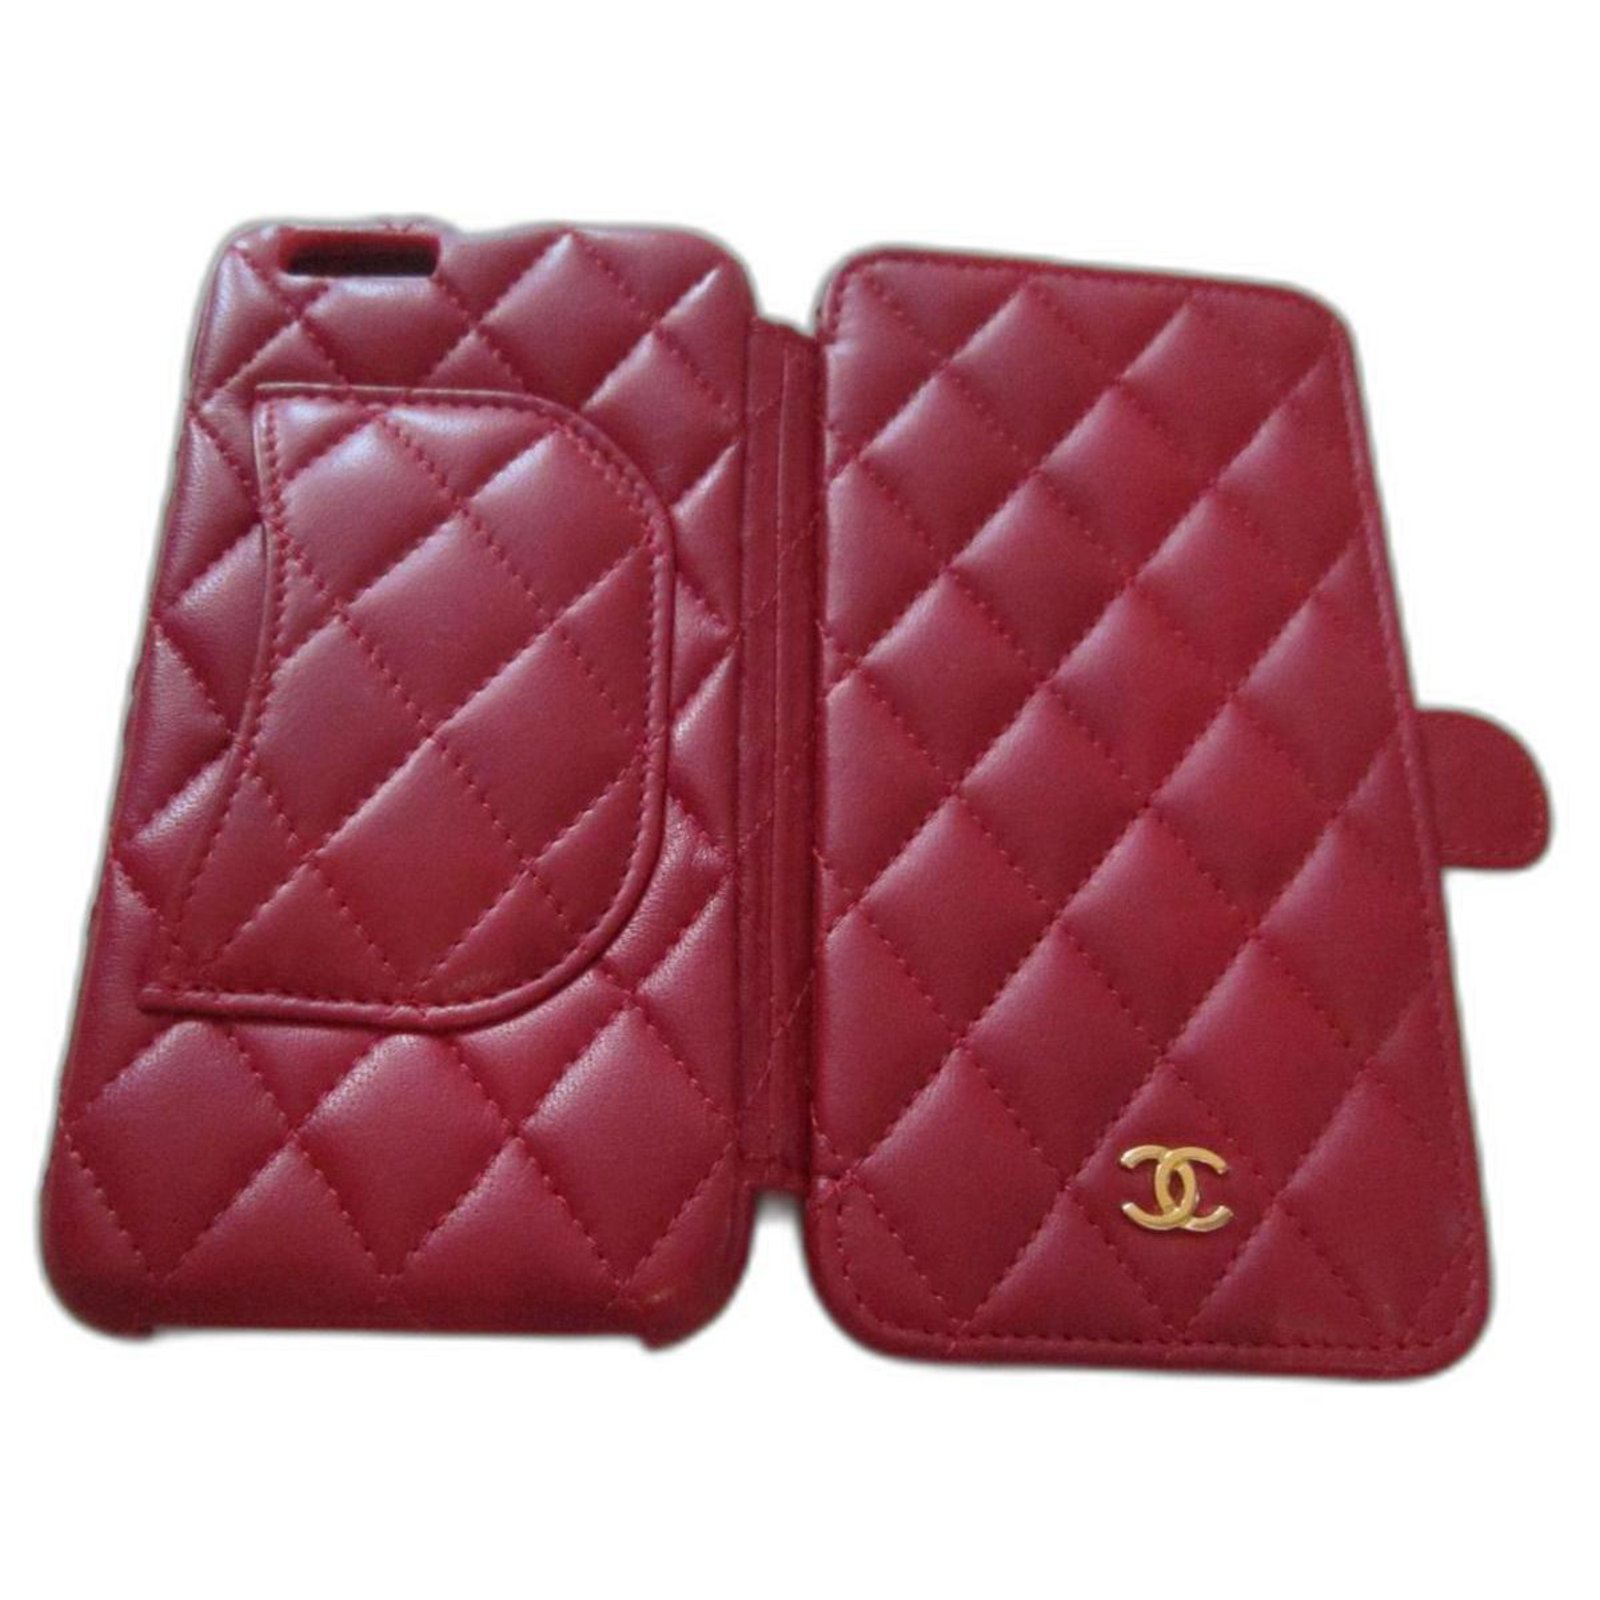 Chanel iPhone Case Wallet 